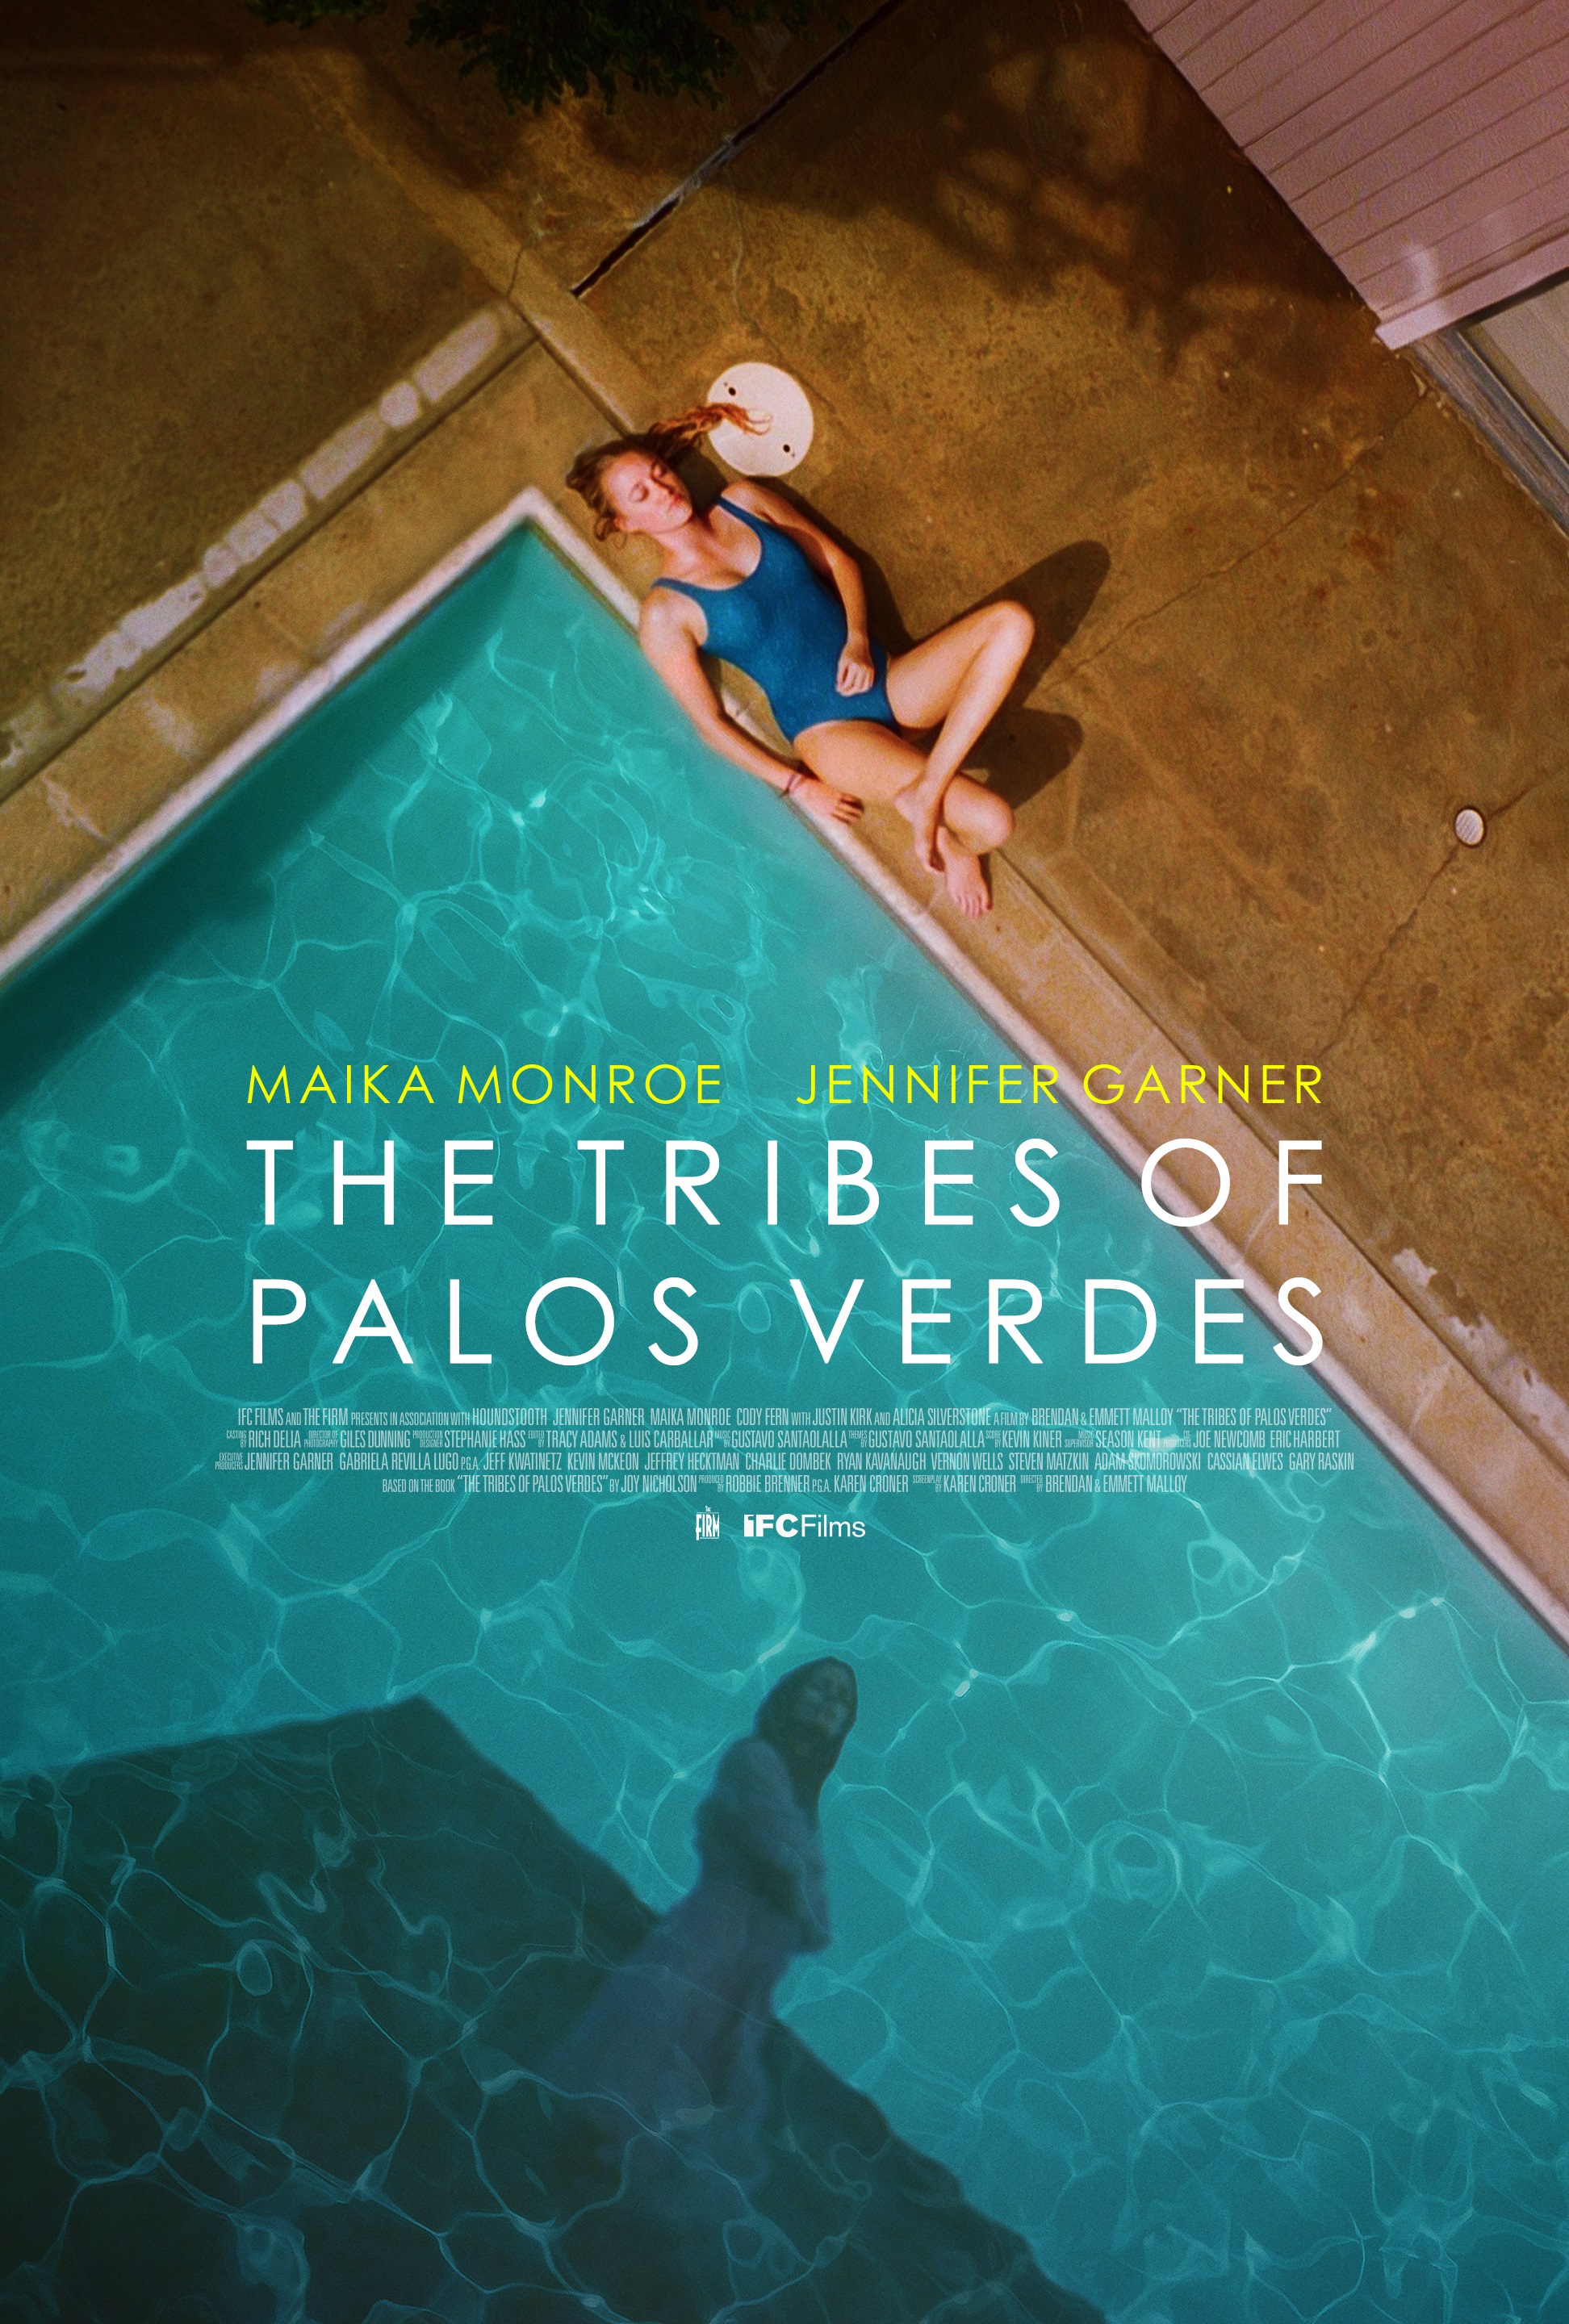 The Tribes Of Palos Verdes Discover The Best In Independent Foreign Documentaries And Genre